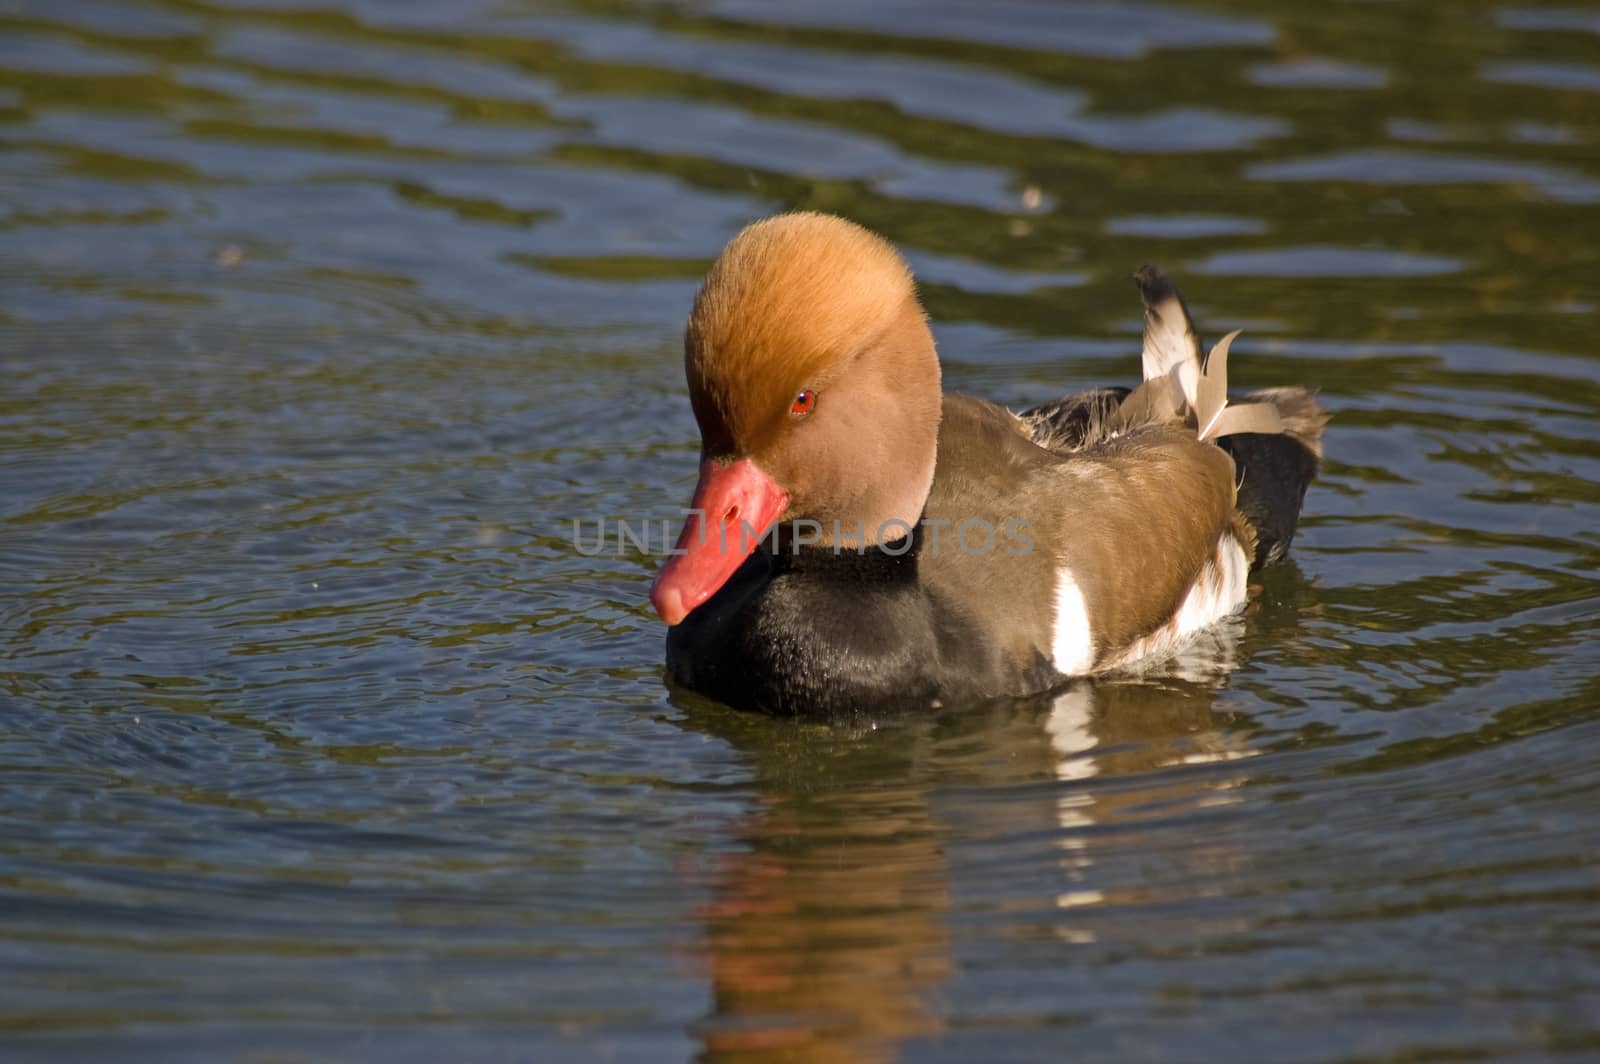 A Red Crested Pochard duck, latin name 'Netta rufina' swimming on a pond.